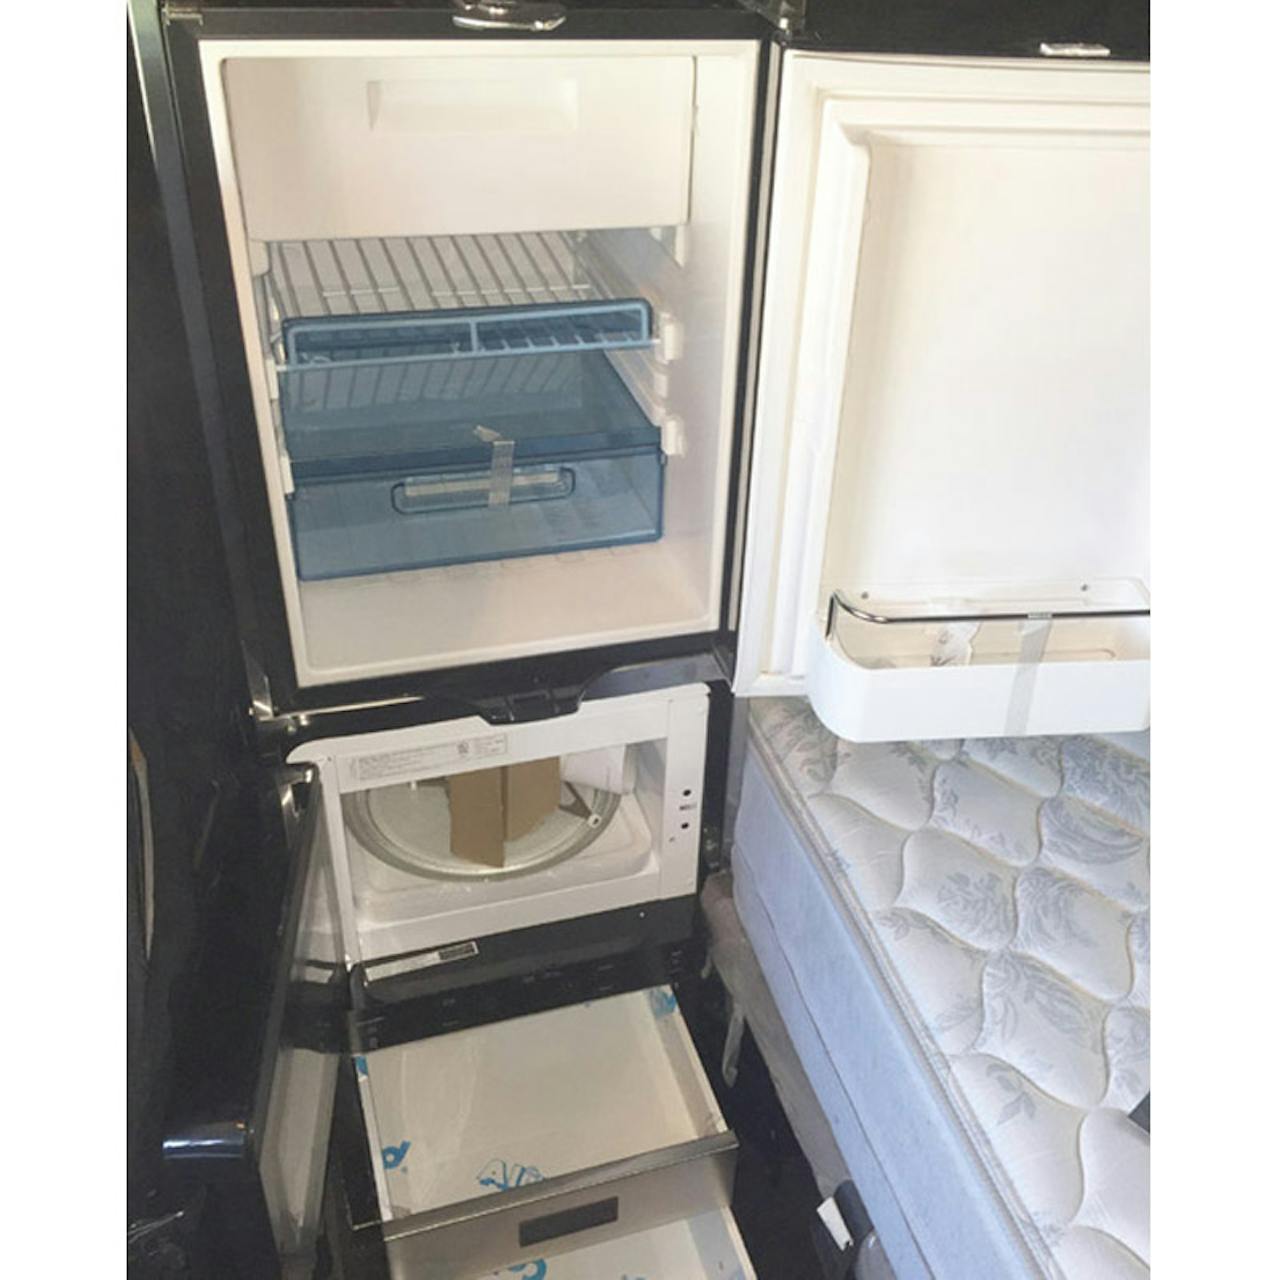 Kenworth W900 Refrigerator And Microwave Storage Solution By Iowa Customs -  Raney's Truck Parts